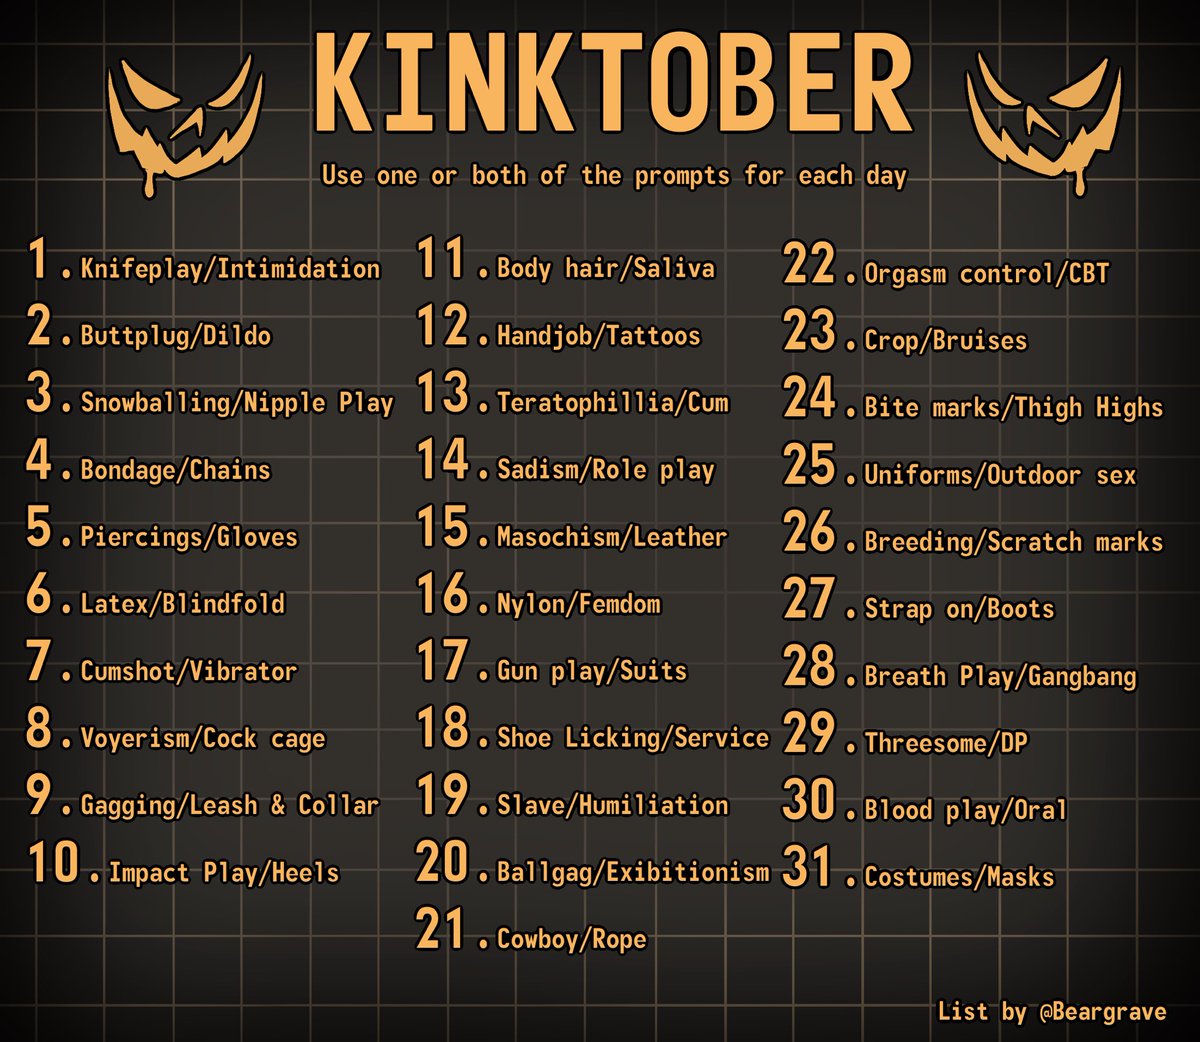 Arktober Days 1-4: Fav Op, Most Likely to Kill You, Op You Clash